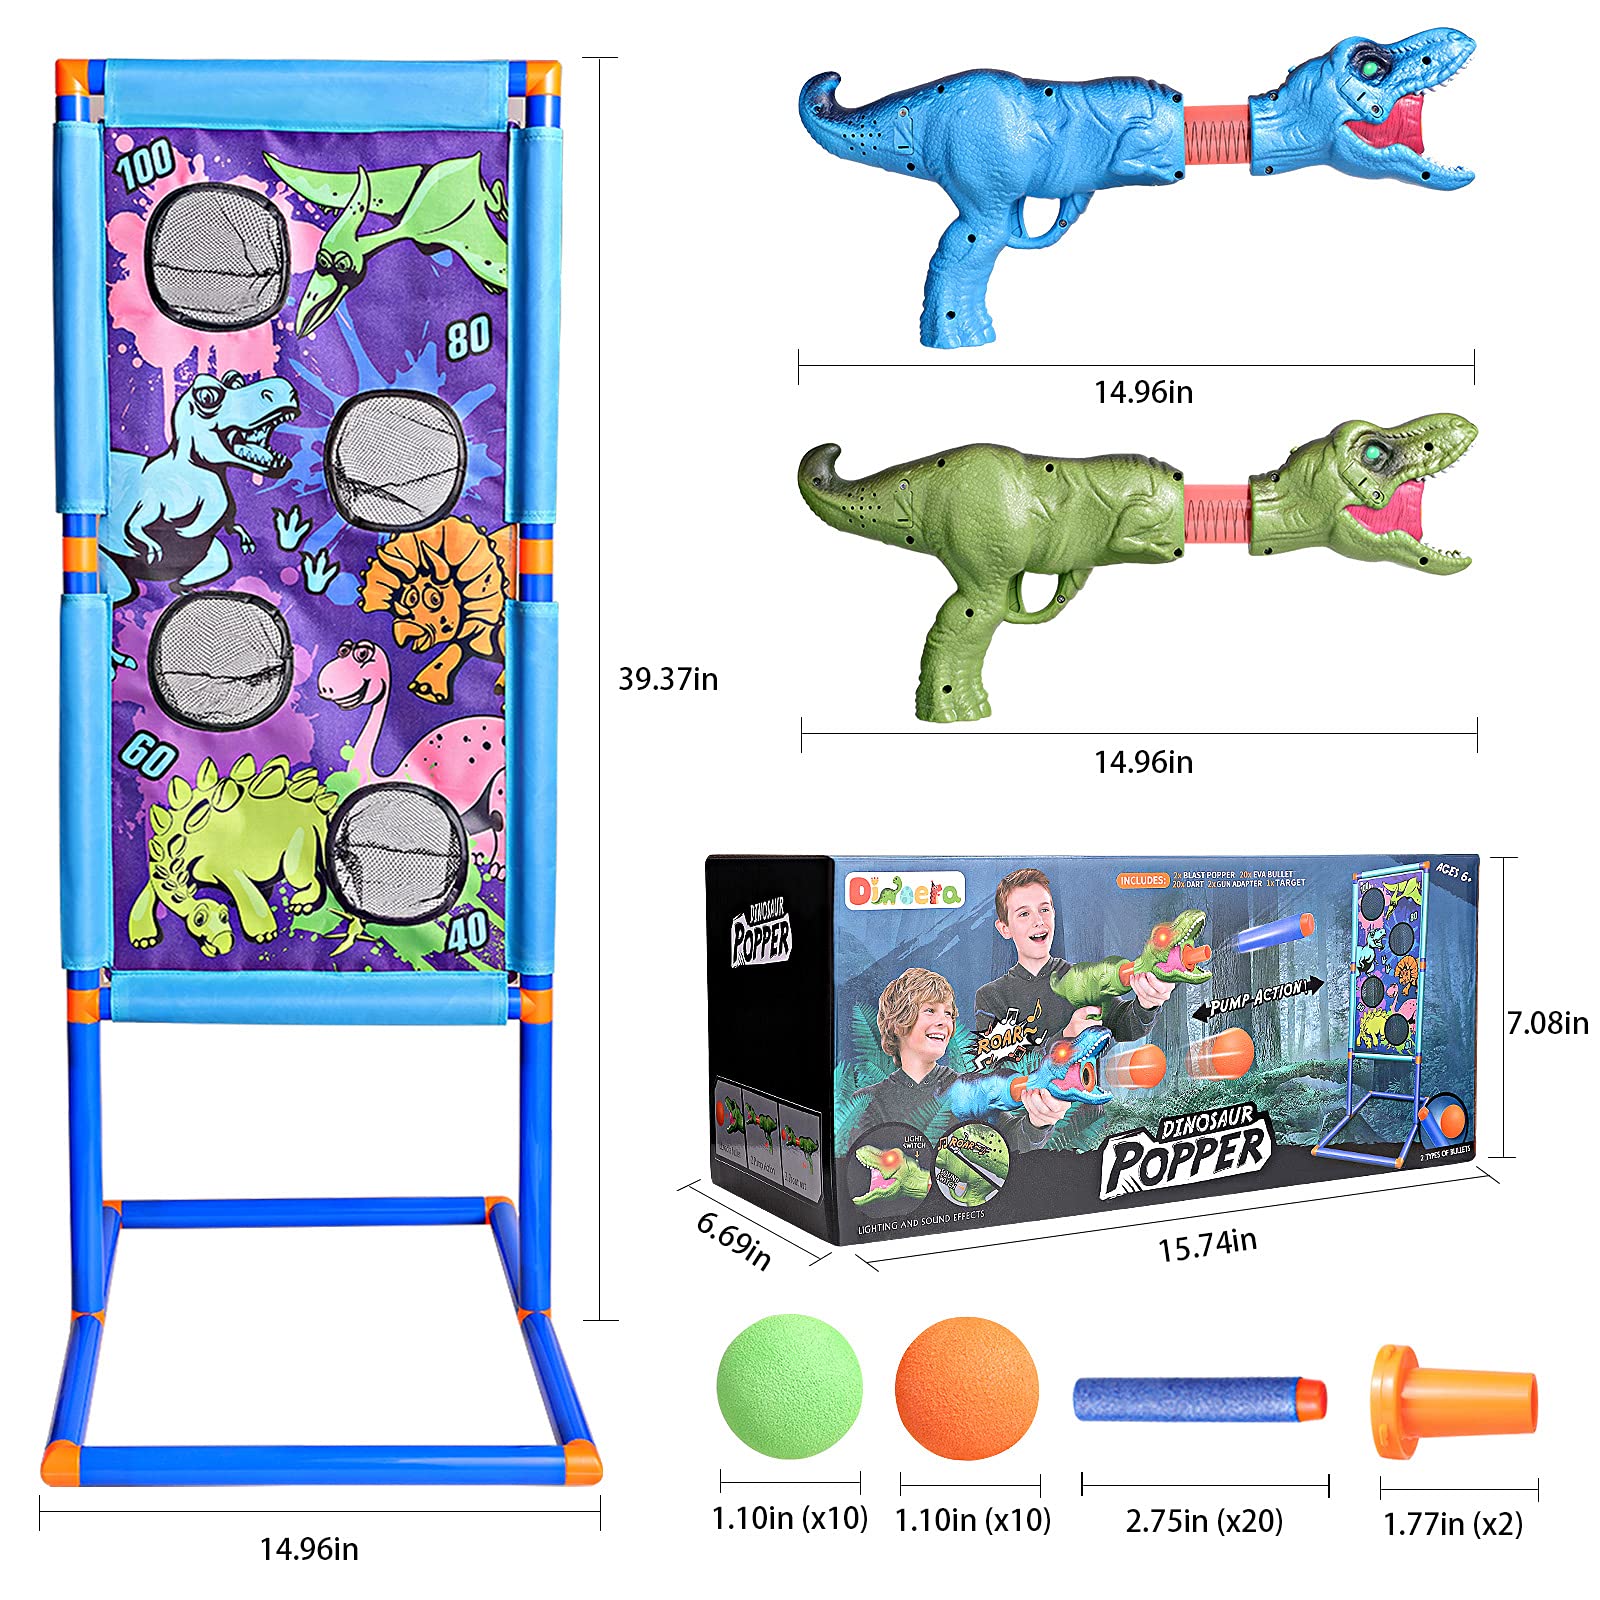 Dinoera Dinosaur Toys for 5 6 7 8 9 10+ Year Old Boys - 2 in 1 Shooting Game Dinosaur Toys for Kids 5-7 | 2pk Foam Ball Popper Air Gun Set Compatible with Nerf Toys Christmas Birthday Gifts Boys Girls